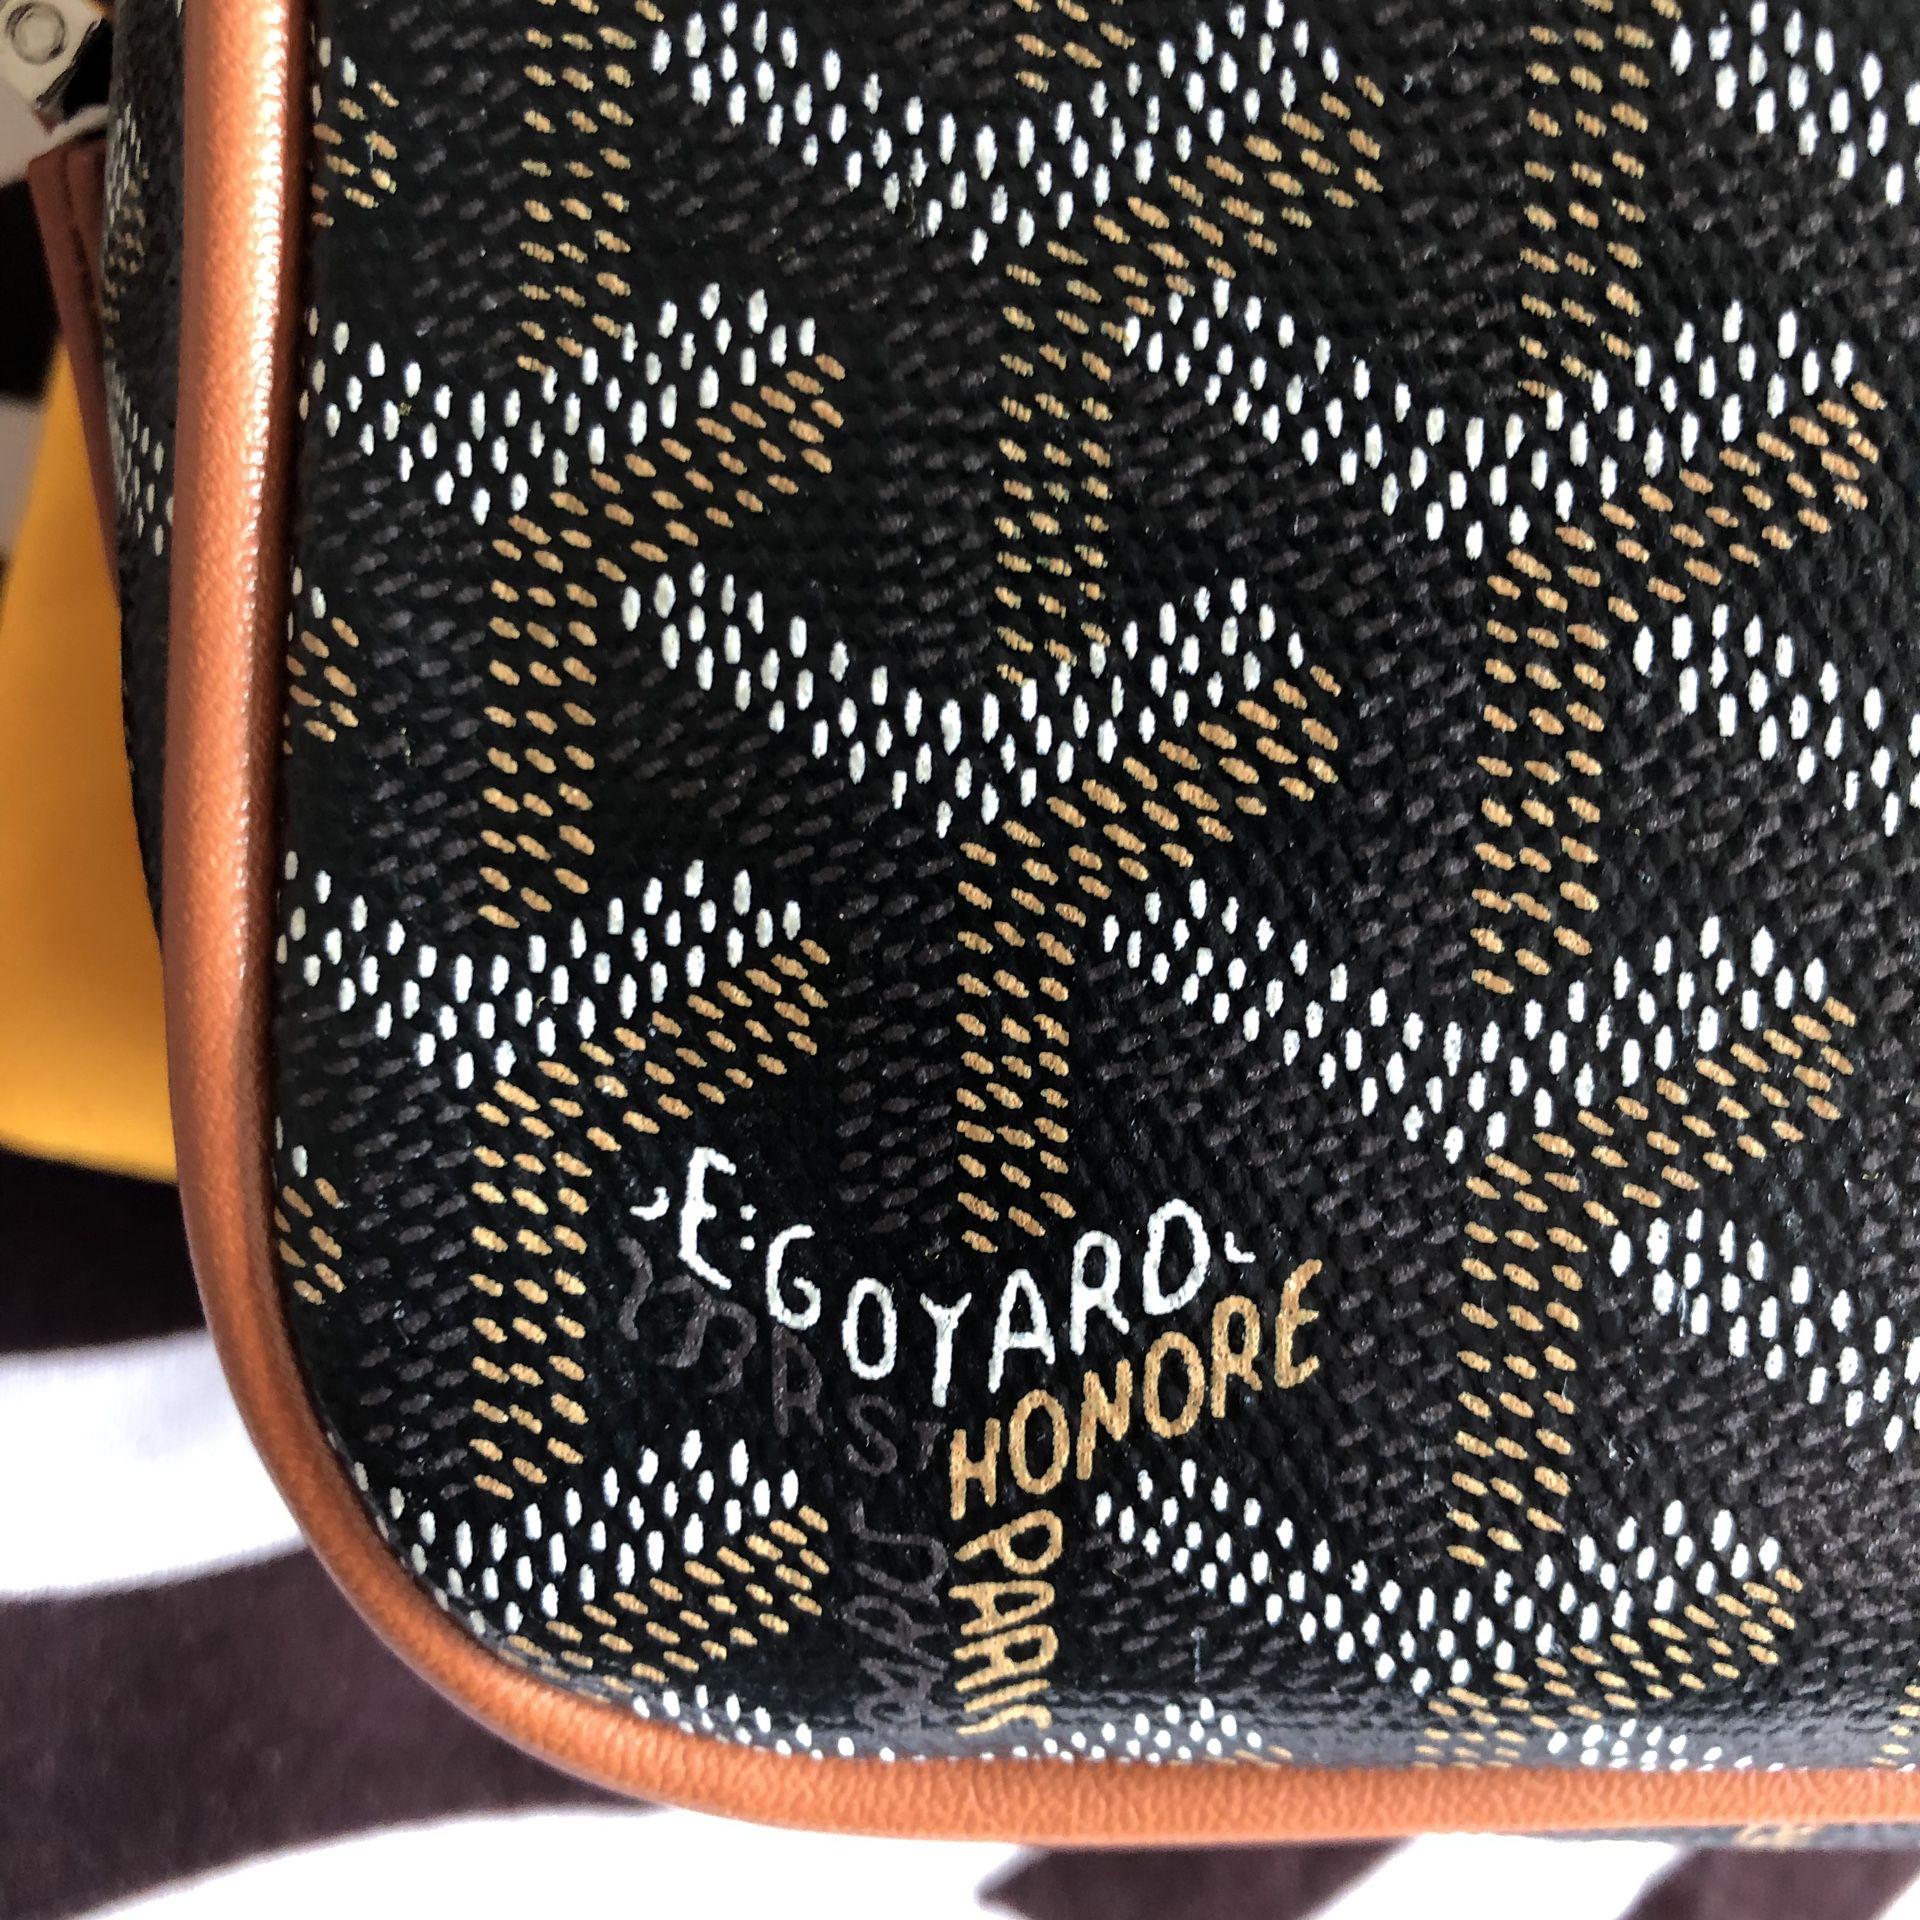 EMIER on Instagram: Preloved Goyard Cap Vert Crossbody Rouge SKU:  C-GO-2517 - AUD2330 (USD 1885) Bank Transfer / PayPal FF /price on  website.⁣⁣⁣ ⁣⁣⁣-PayPal GS has an extra 4% surcharge⁣⁣⁣ ⁣⁣⁣